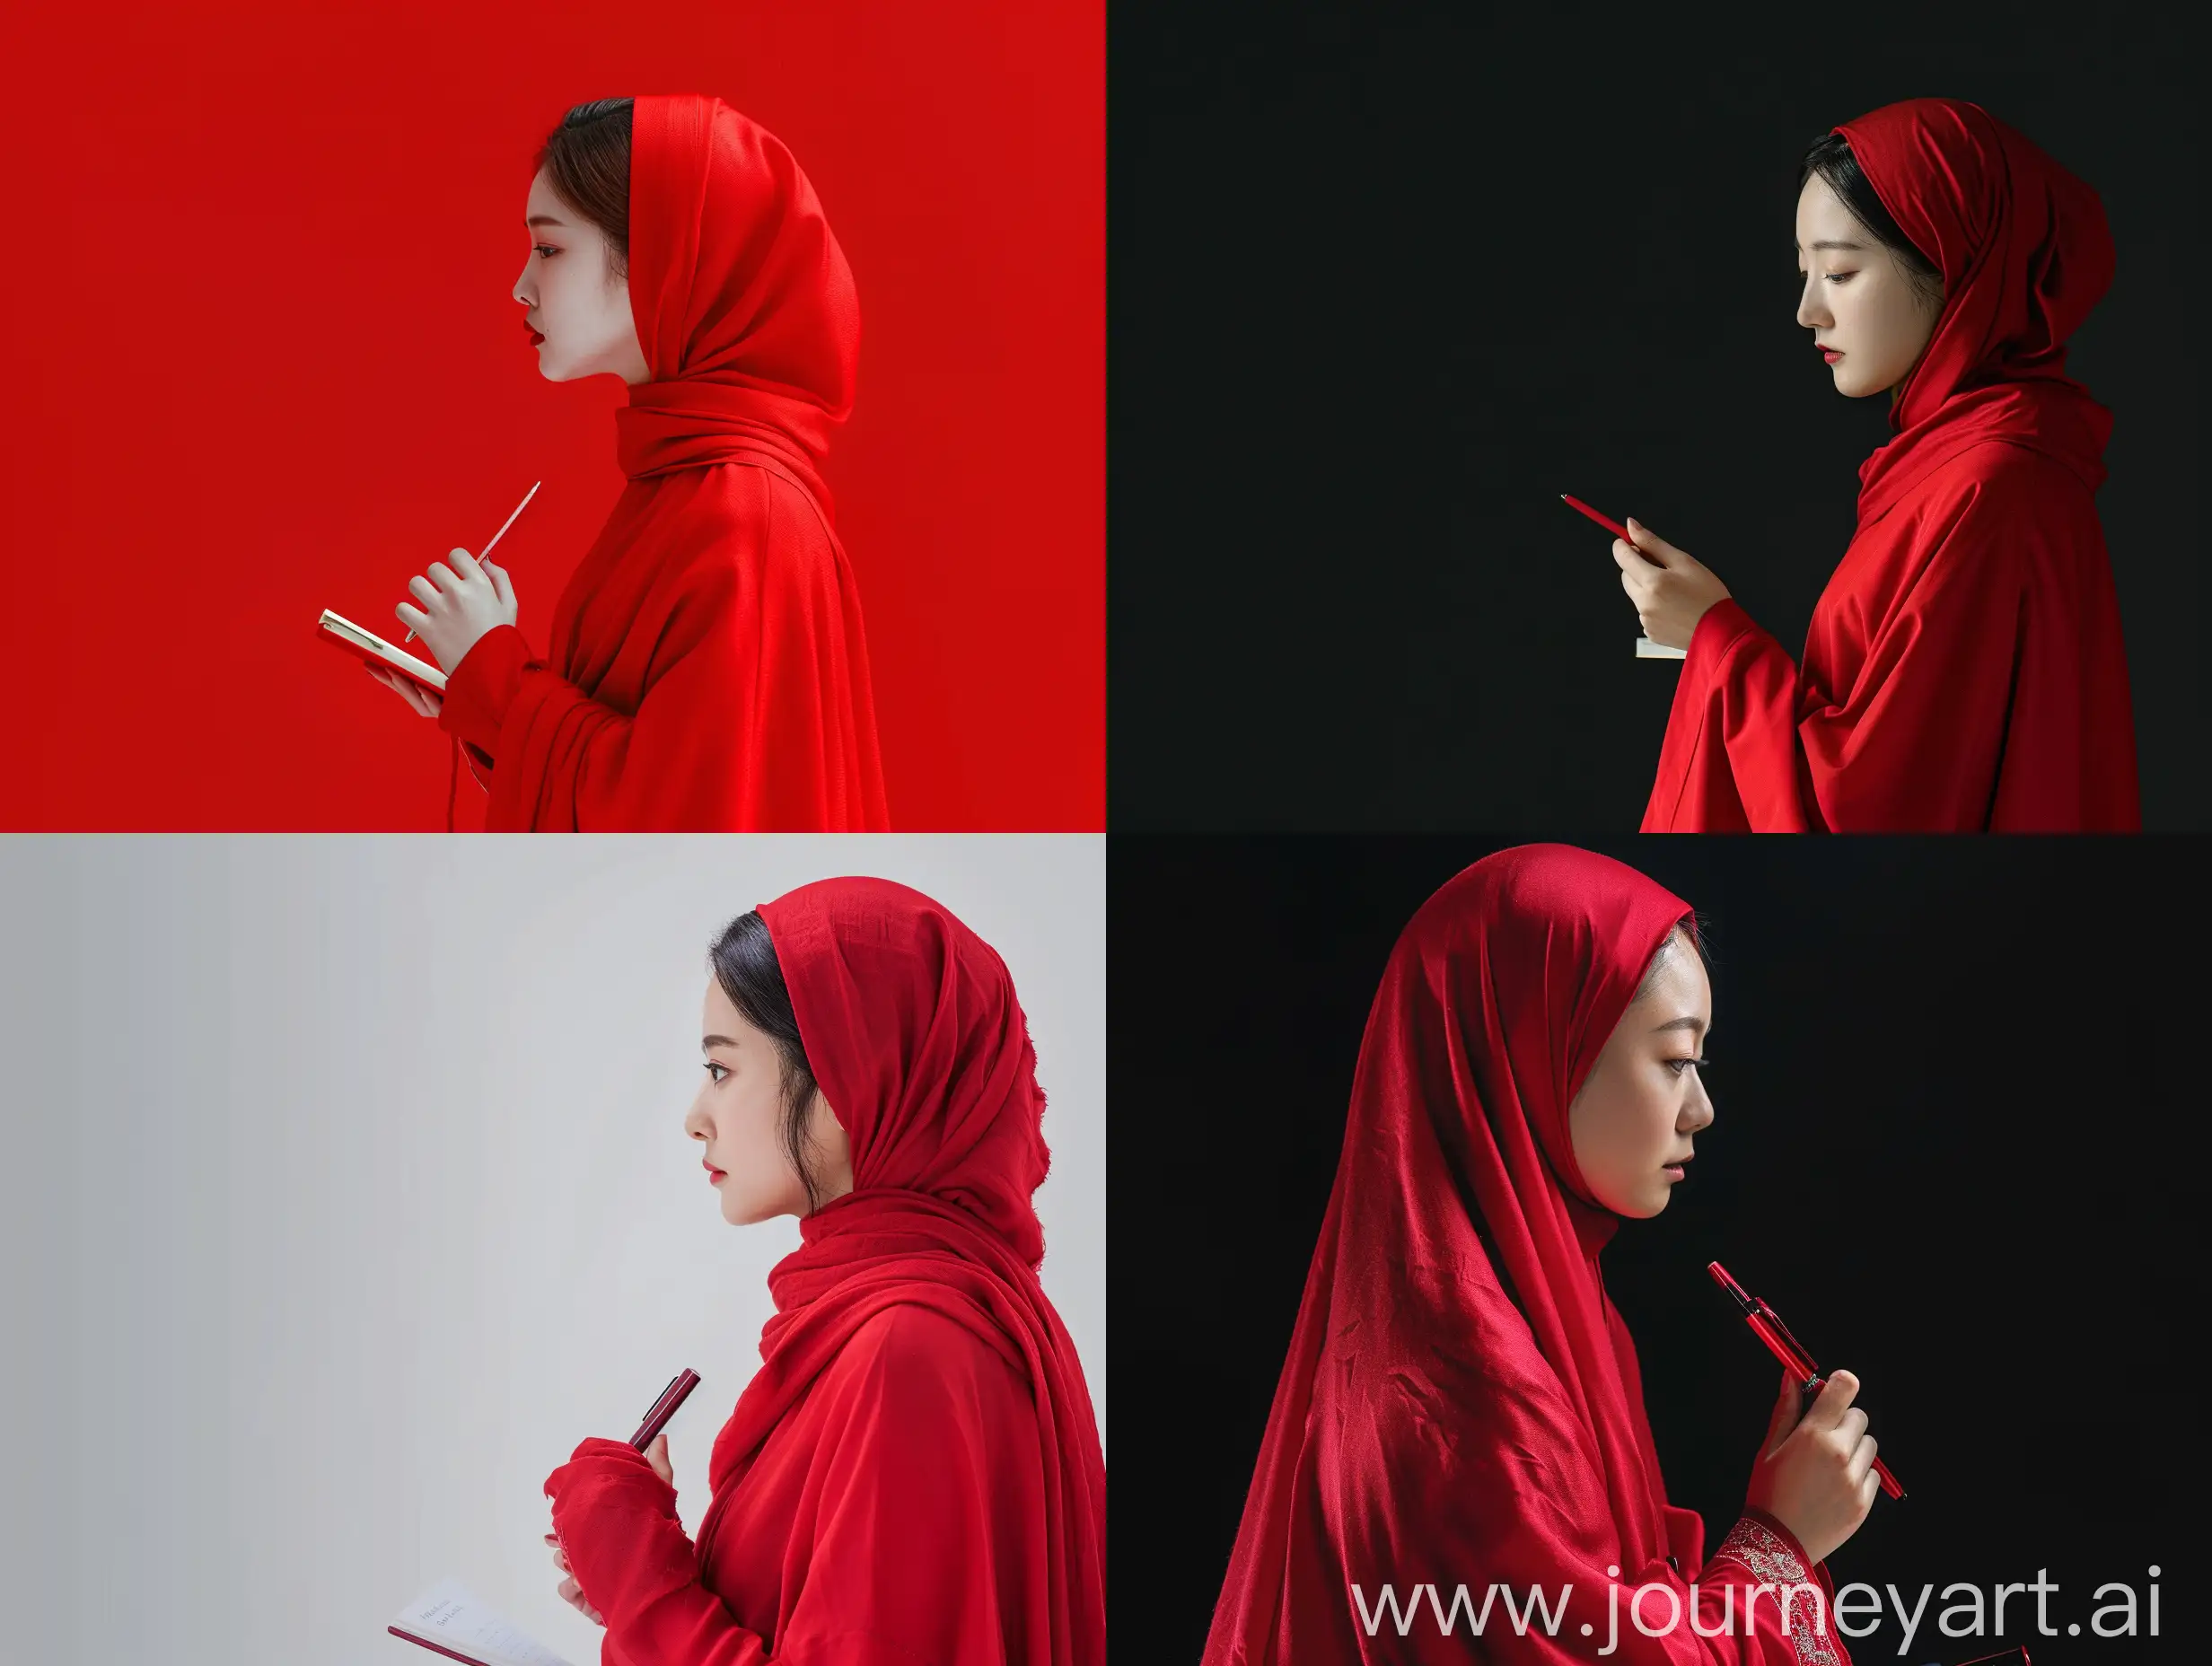 a banner image of an Asian student cloaked in red, wearing a red headscarf, holding a pen, viewed from the side